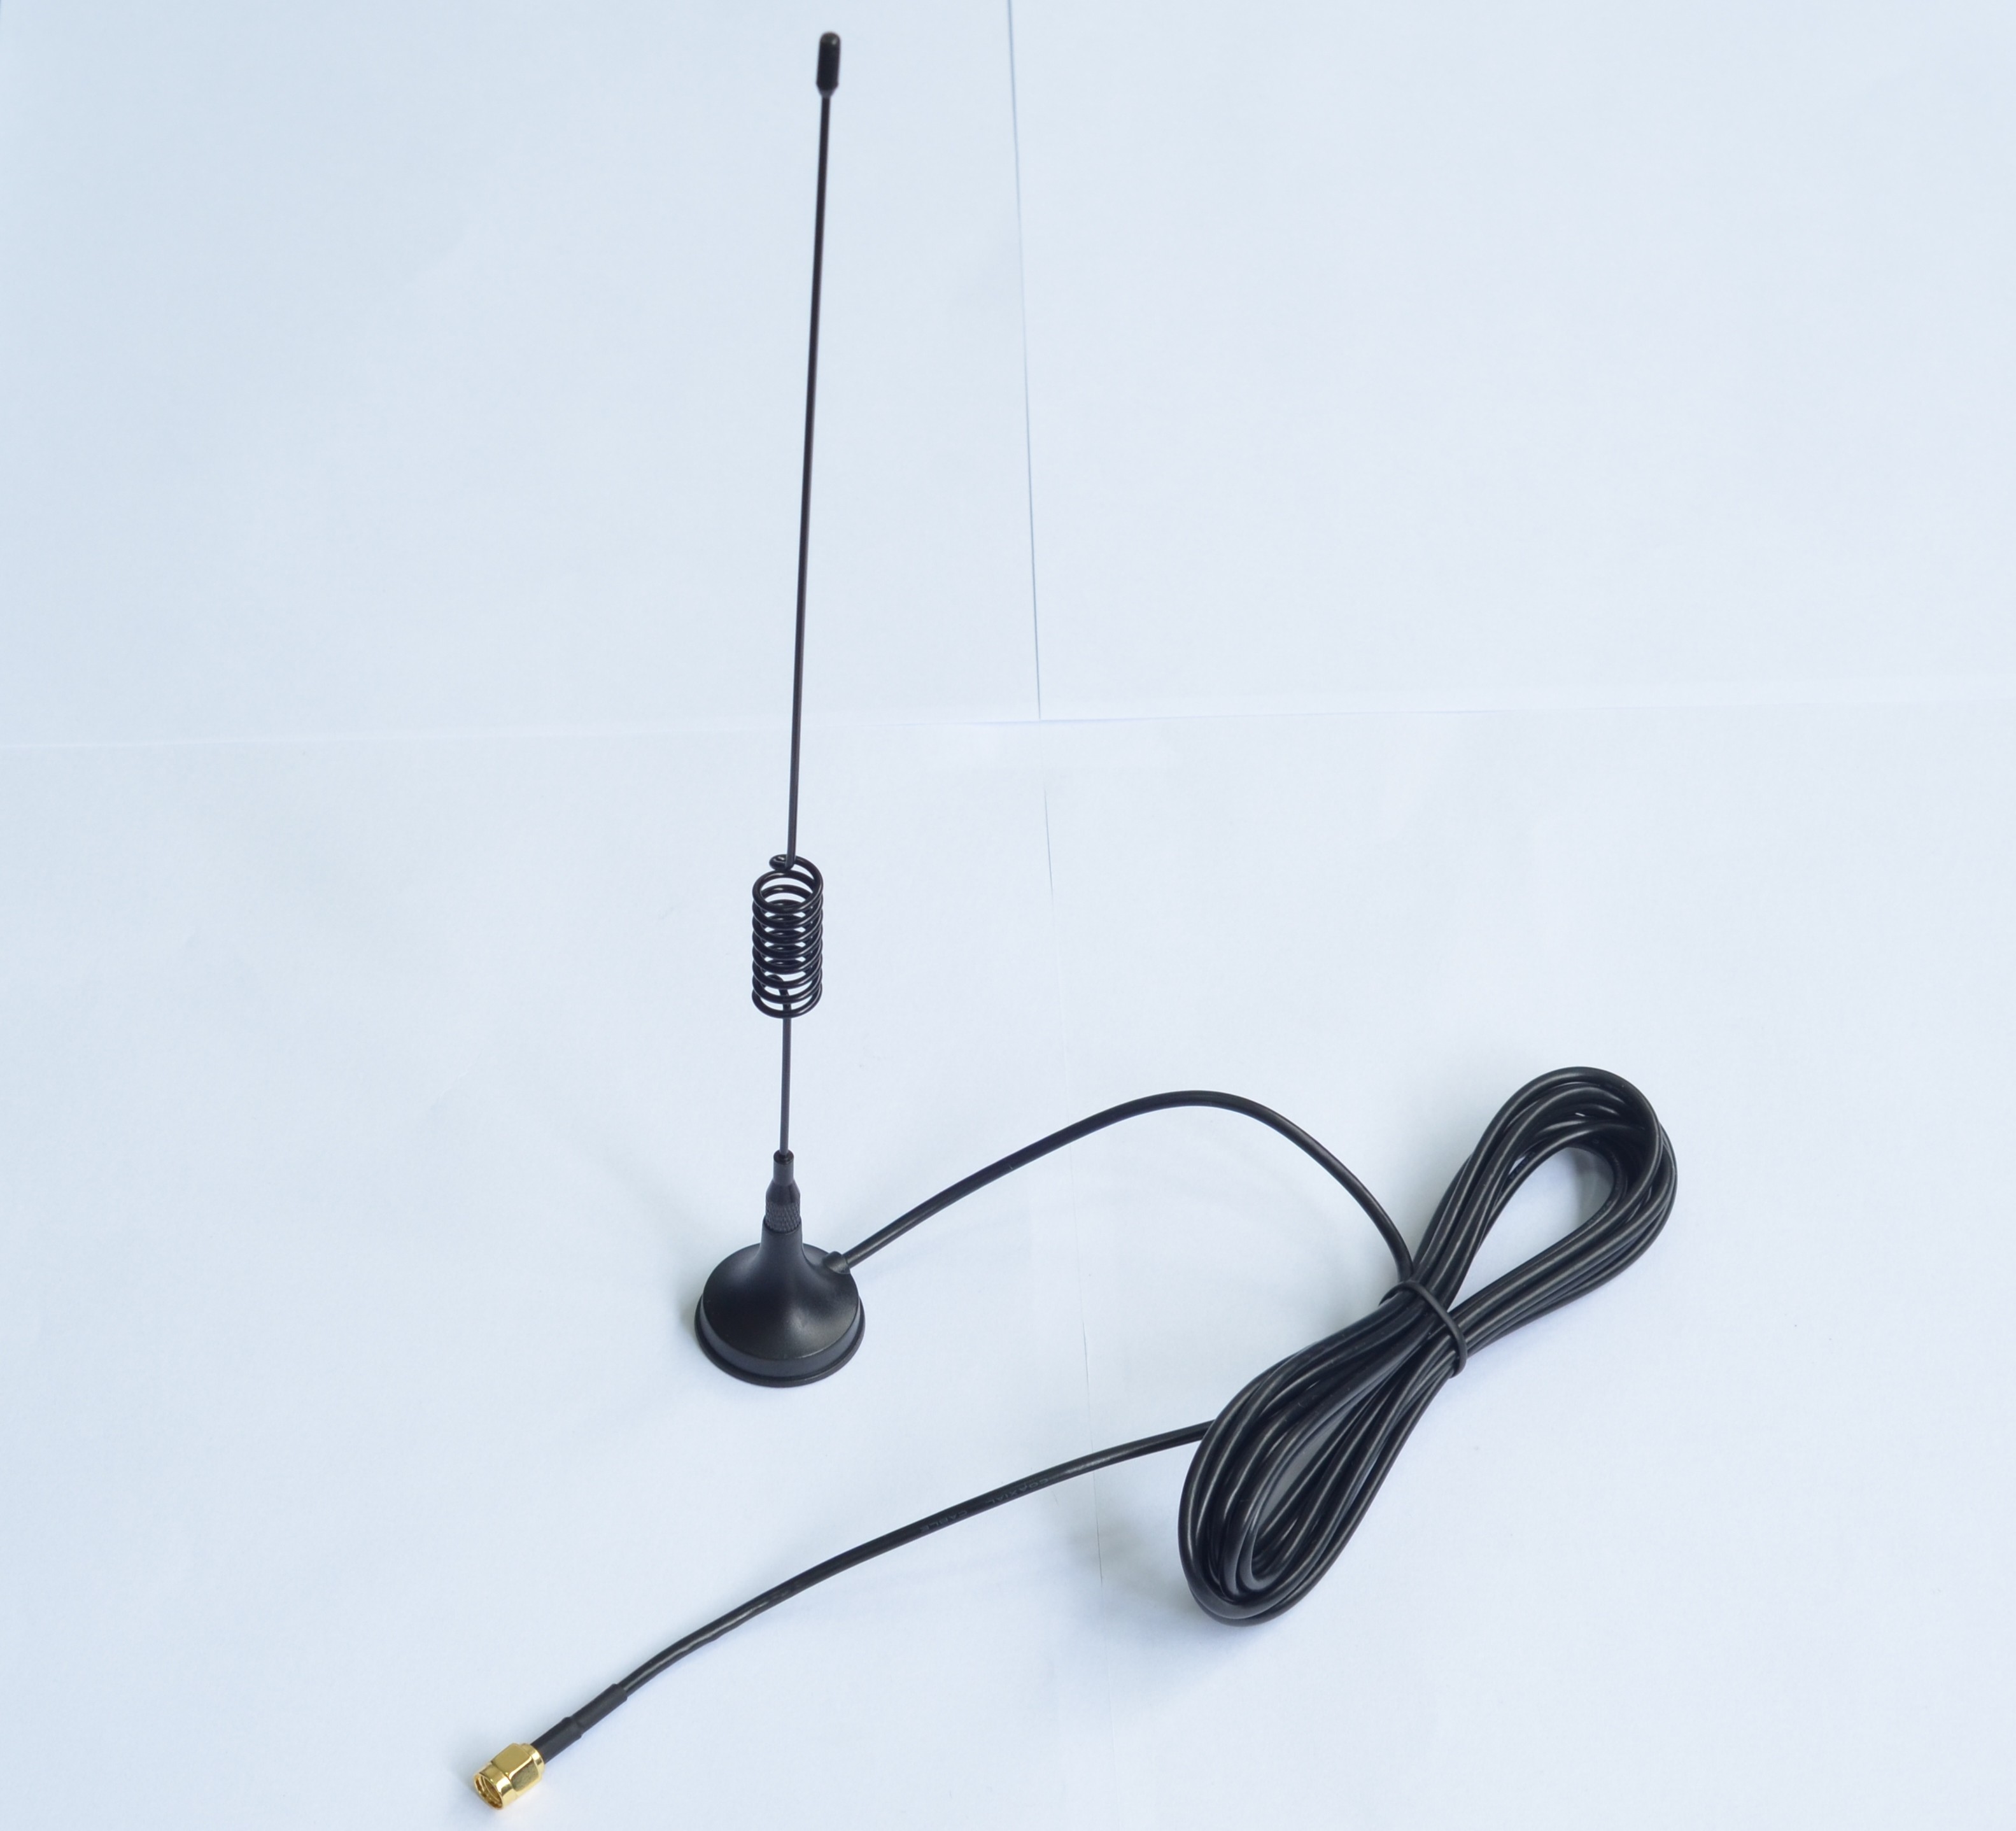 China GSM Magnetic Mount Antenna / 3G External Antenna RG 174 Cable Length 3 Meters With SMA Connector wholesale